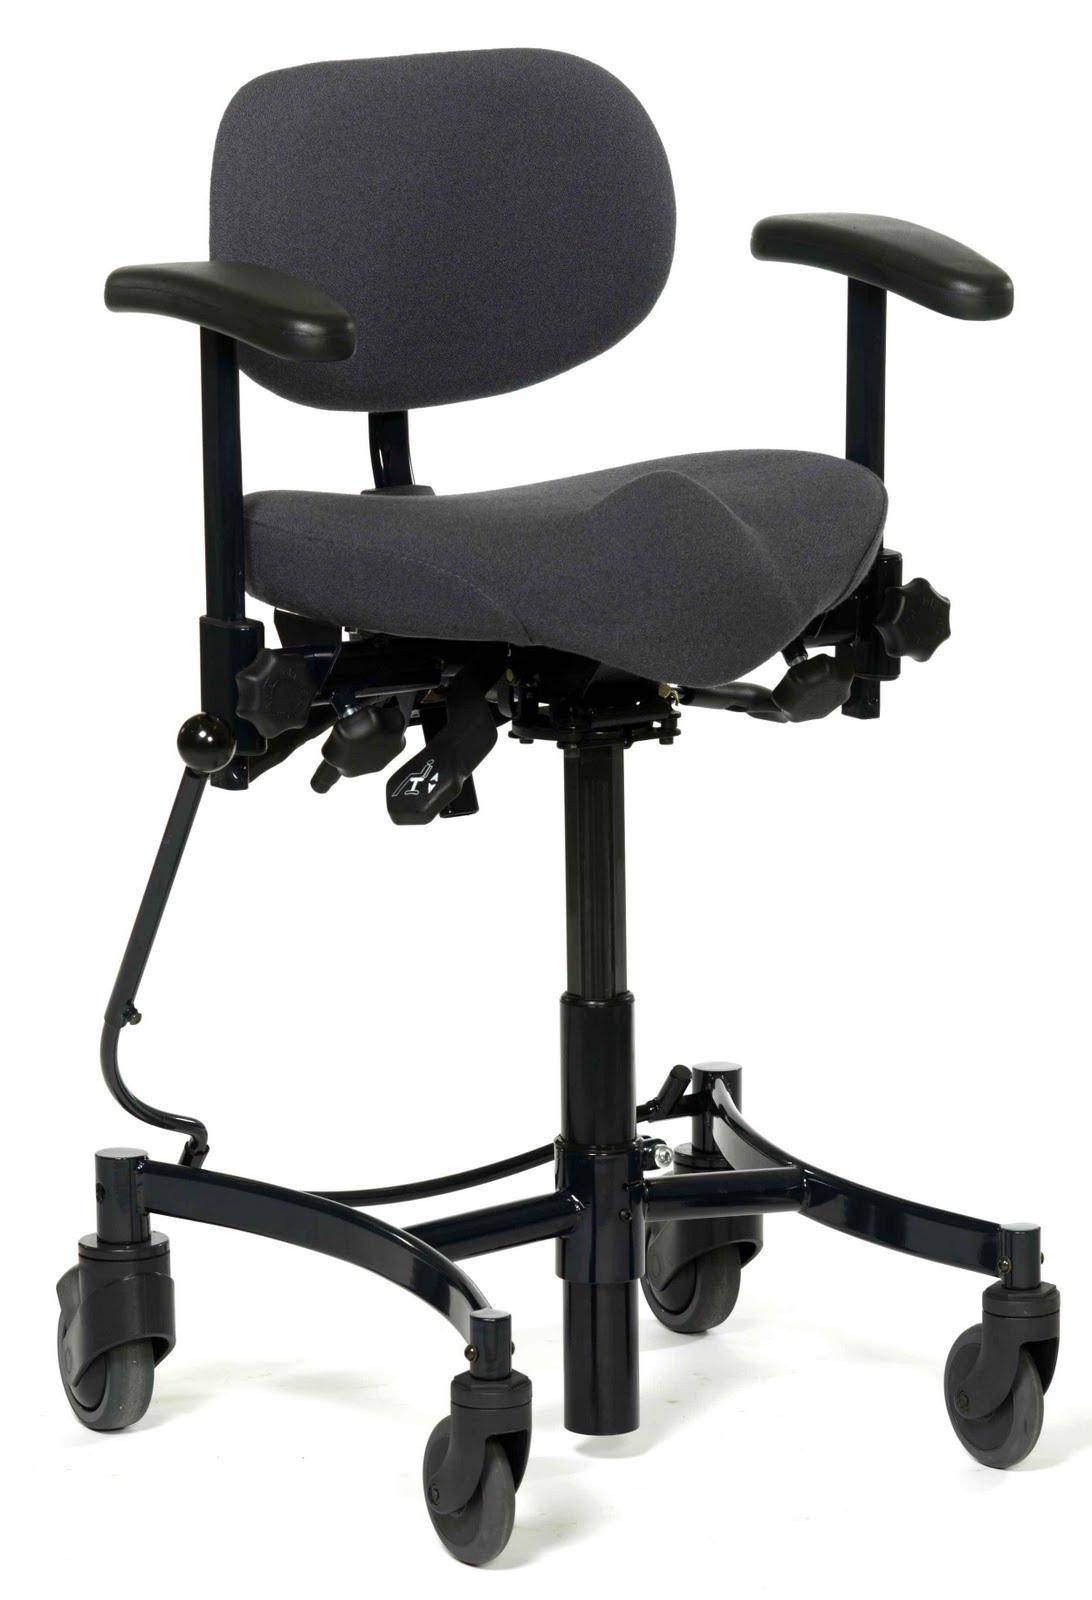 An arthritis chair from VELA is one of the best aids for arthritis